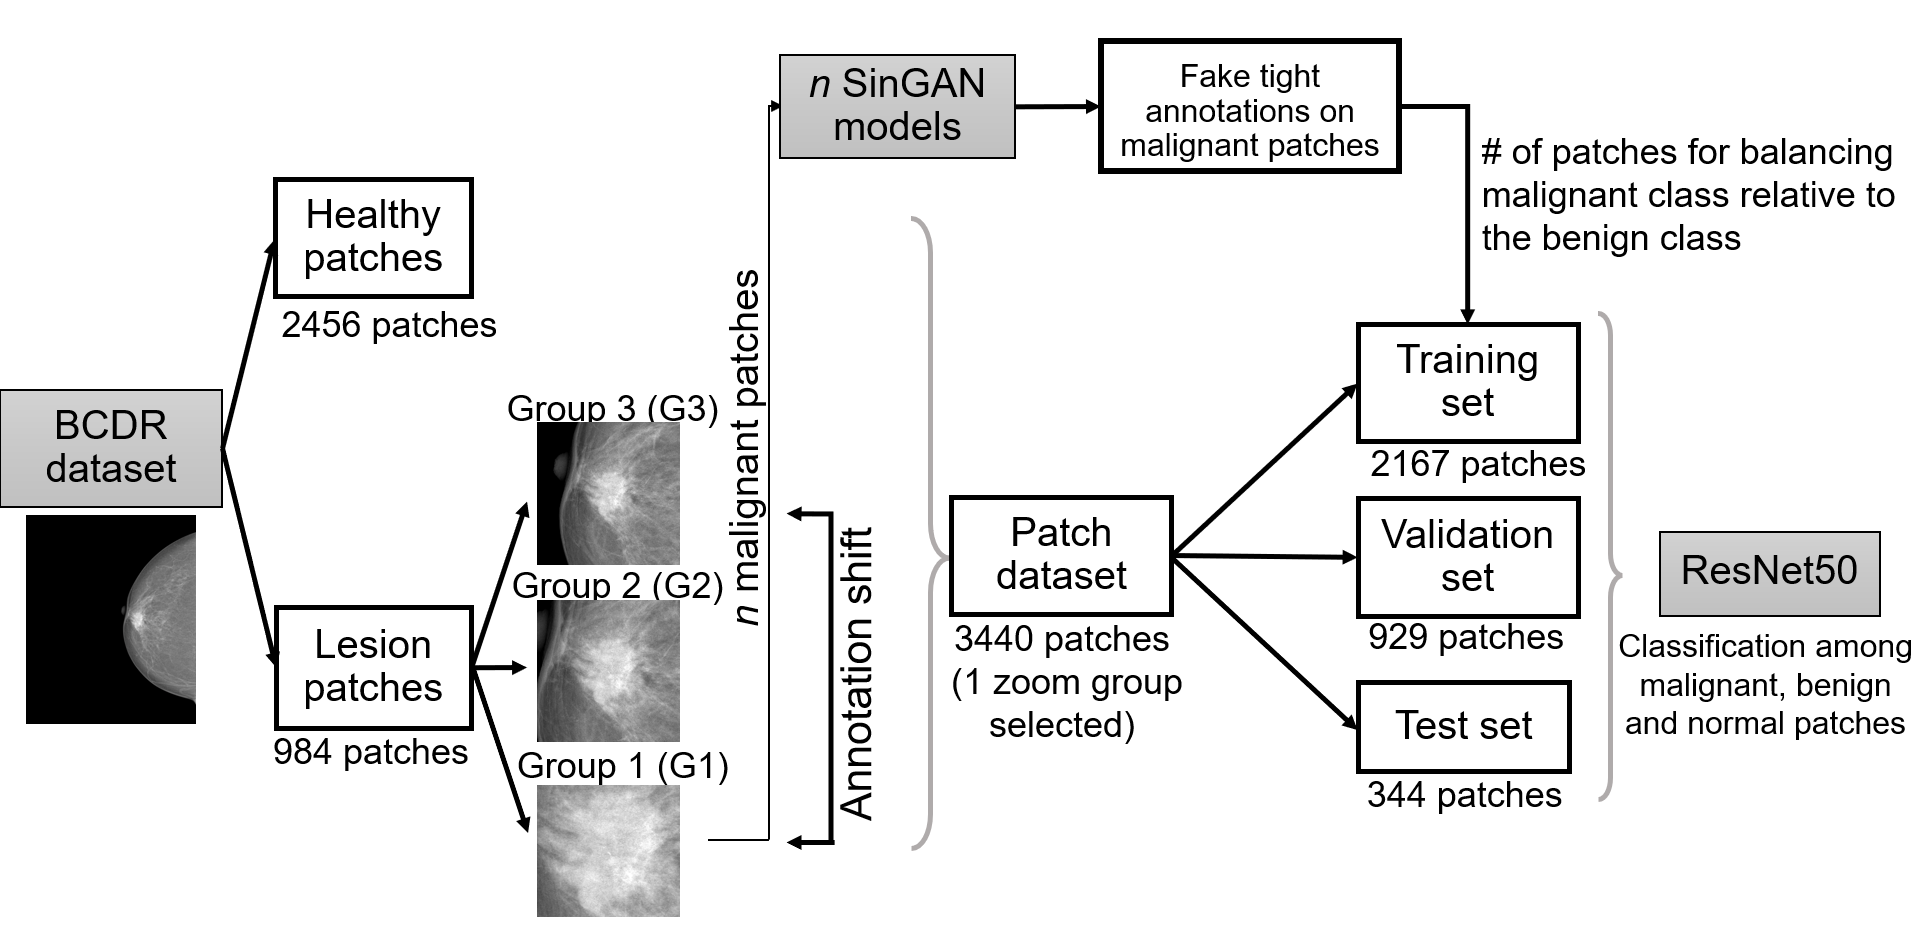 Mitigating annotation shift in cancer classification using single image generative models